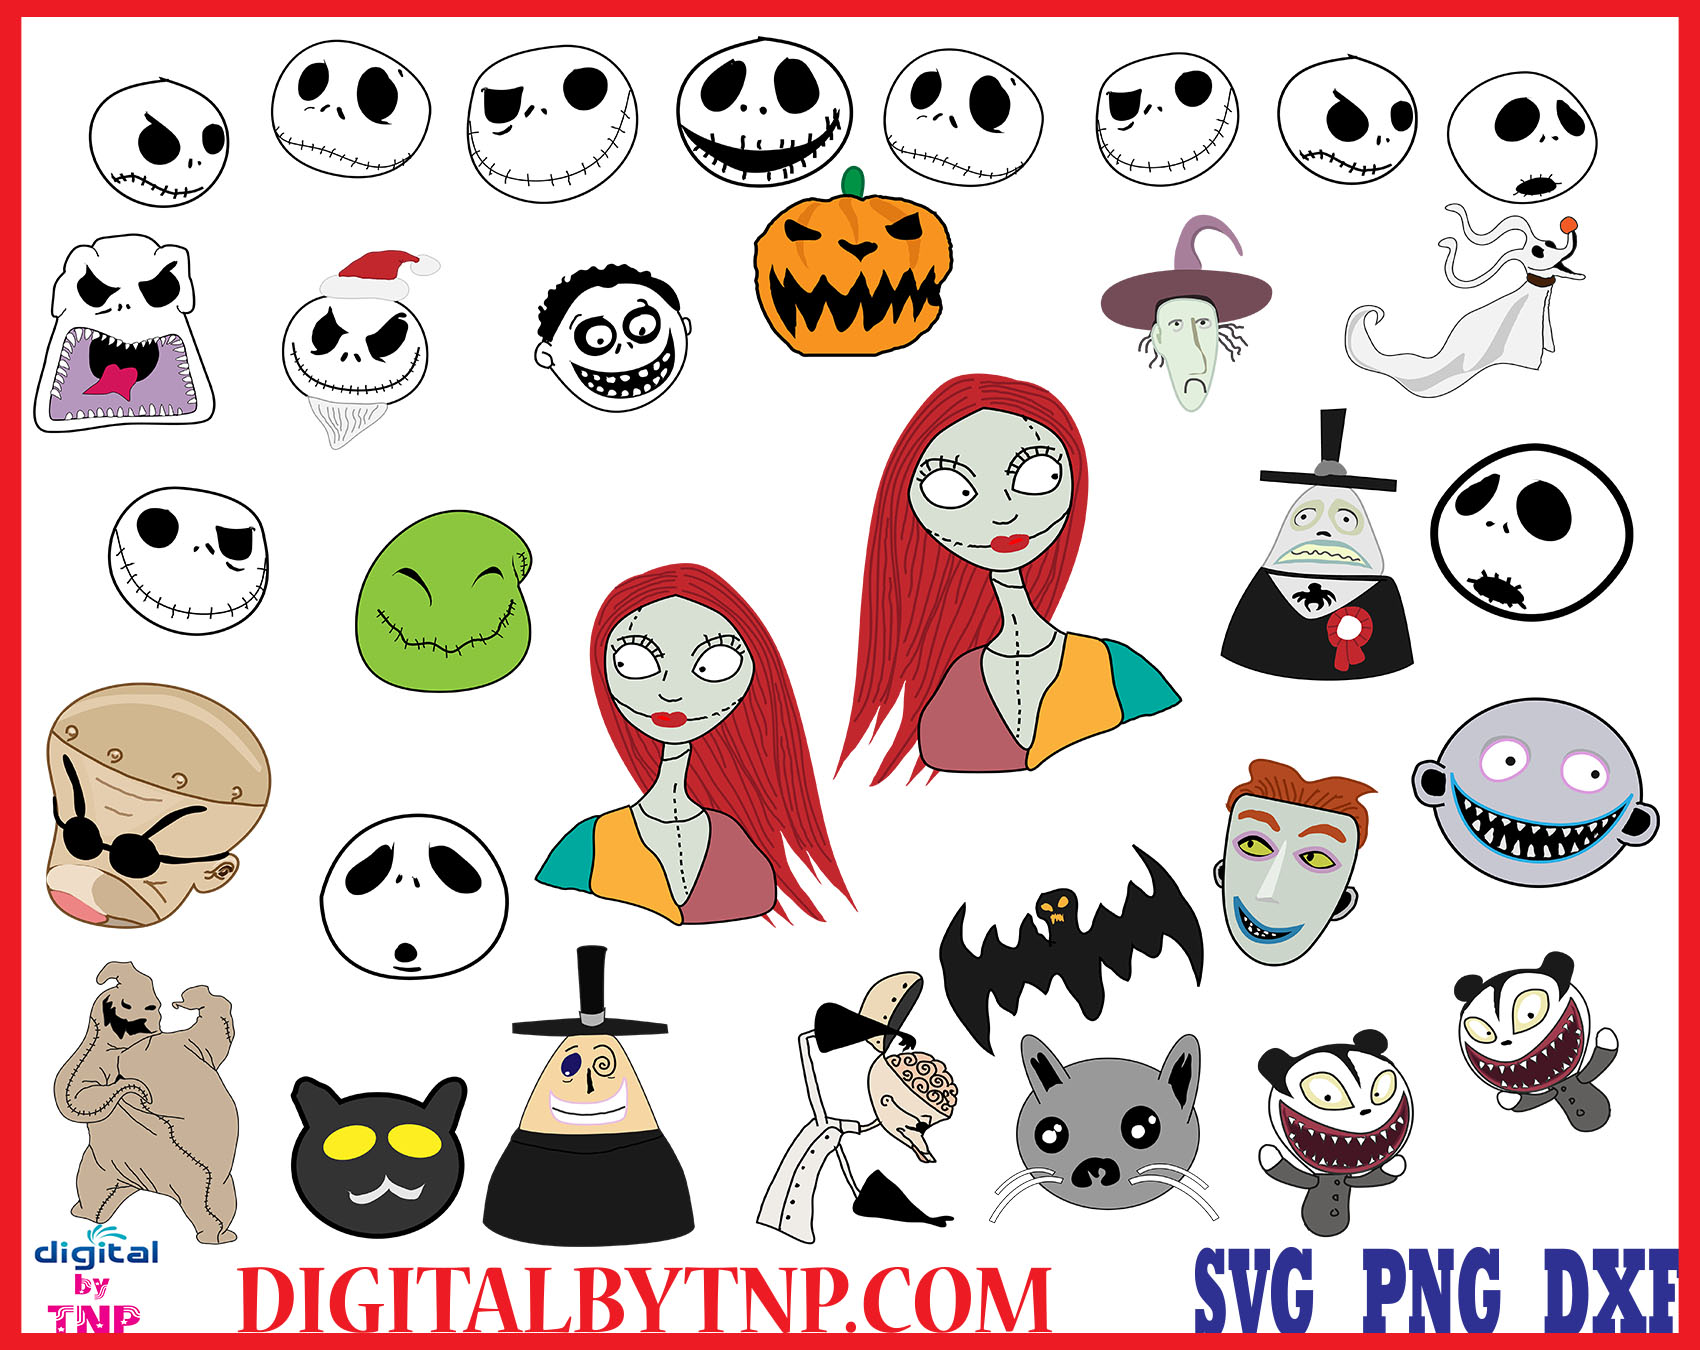 Download Nightmare before christmas svg, Christmas svg, Nightmare svg, love svg, Helloween svg - Customer ...